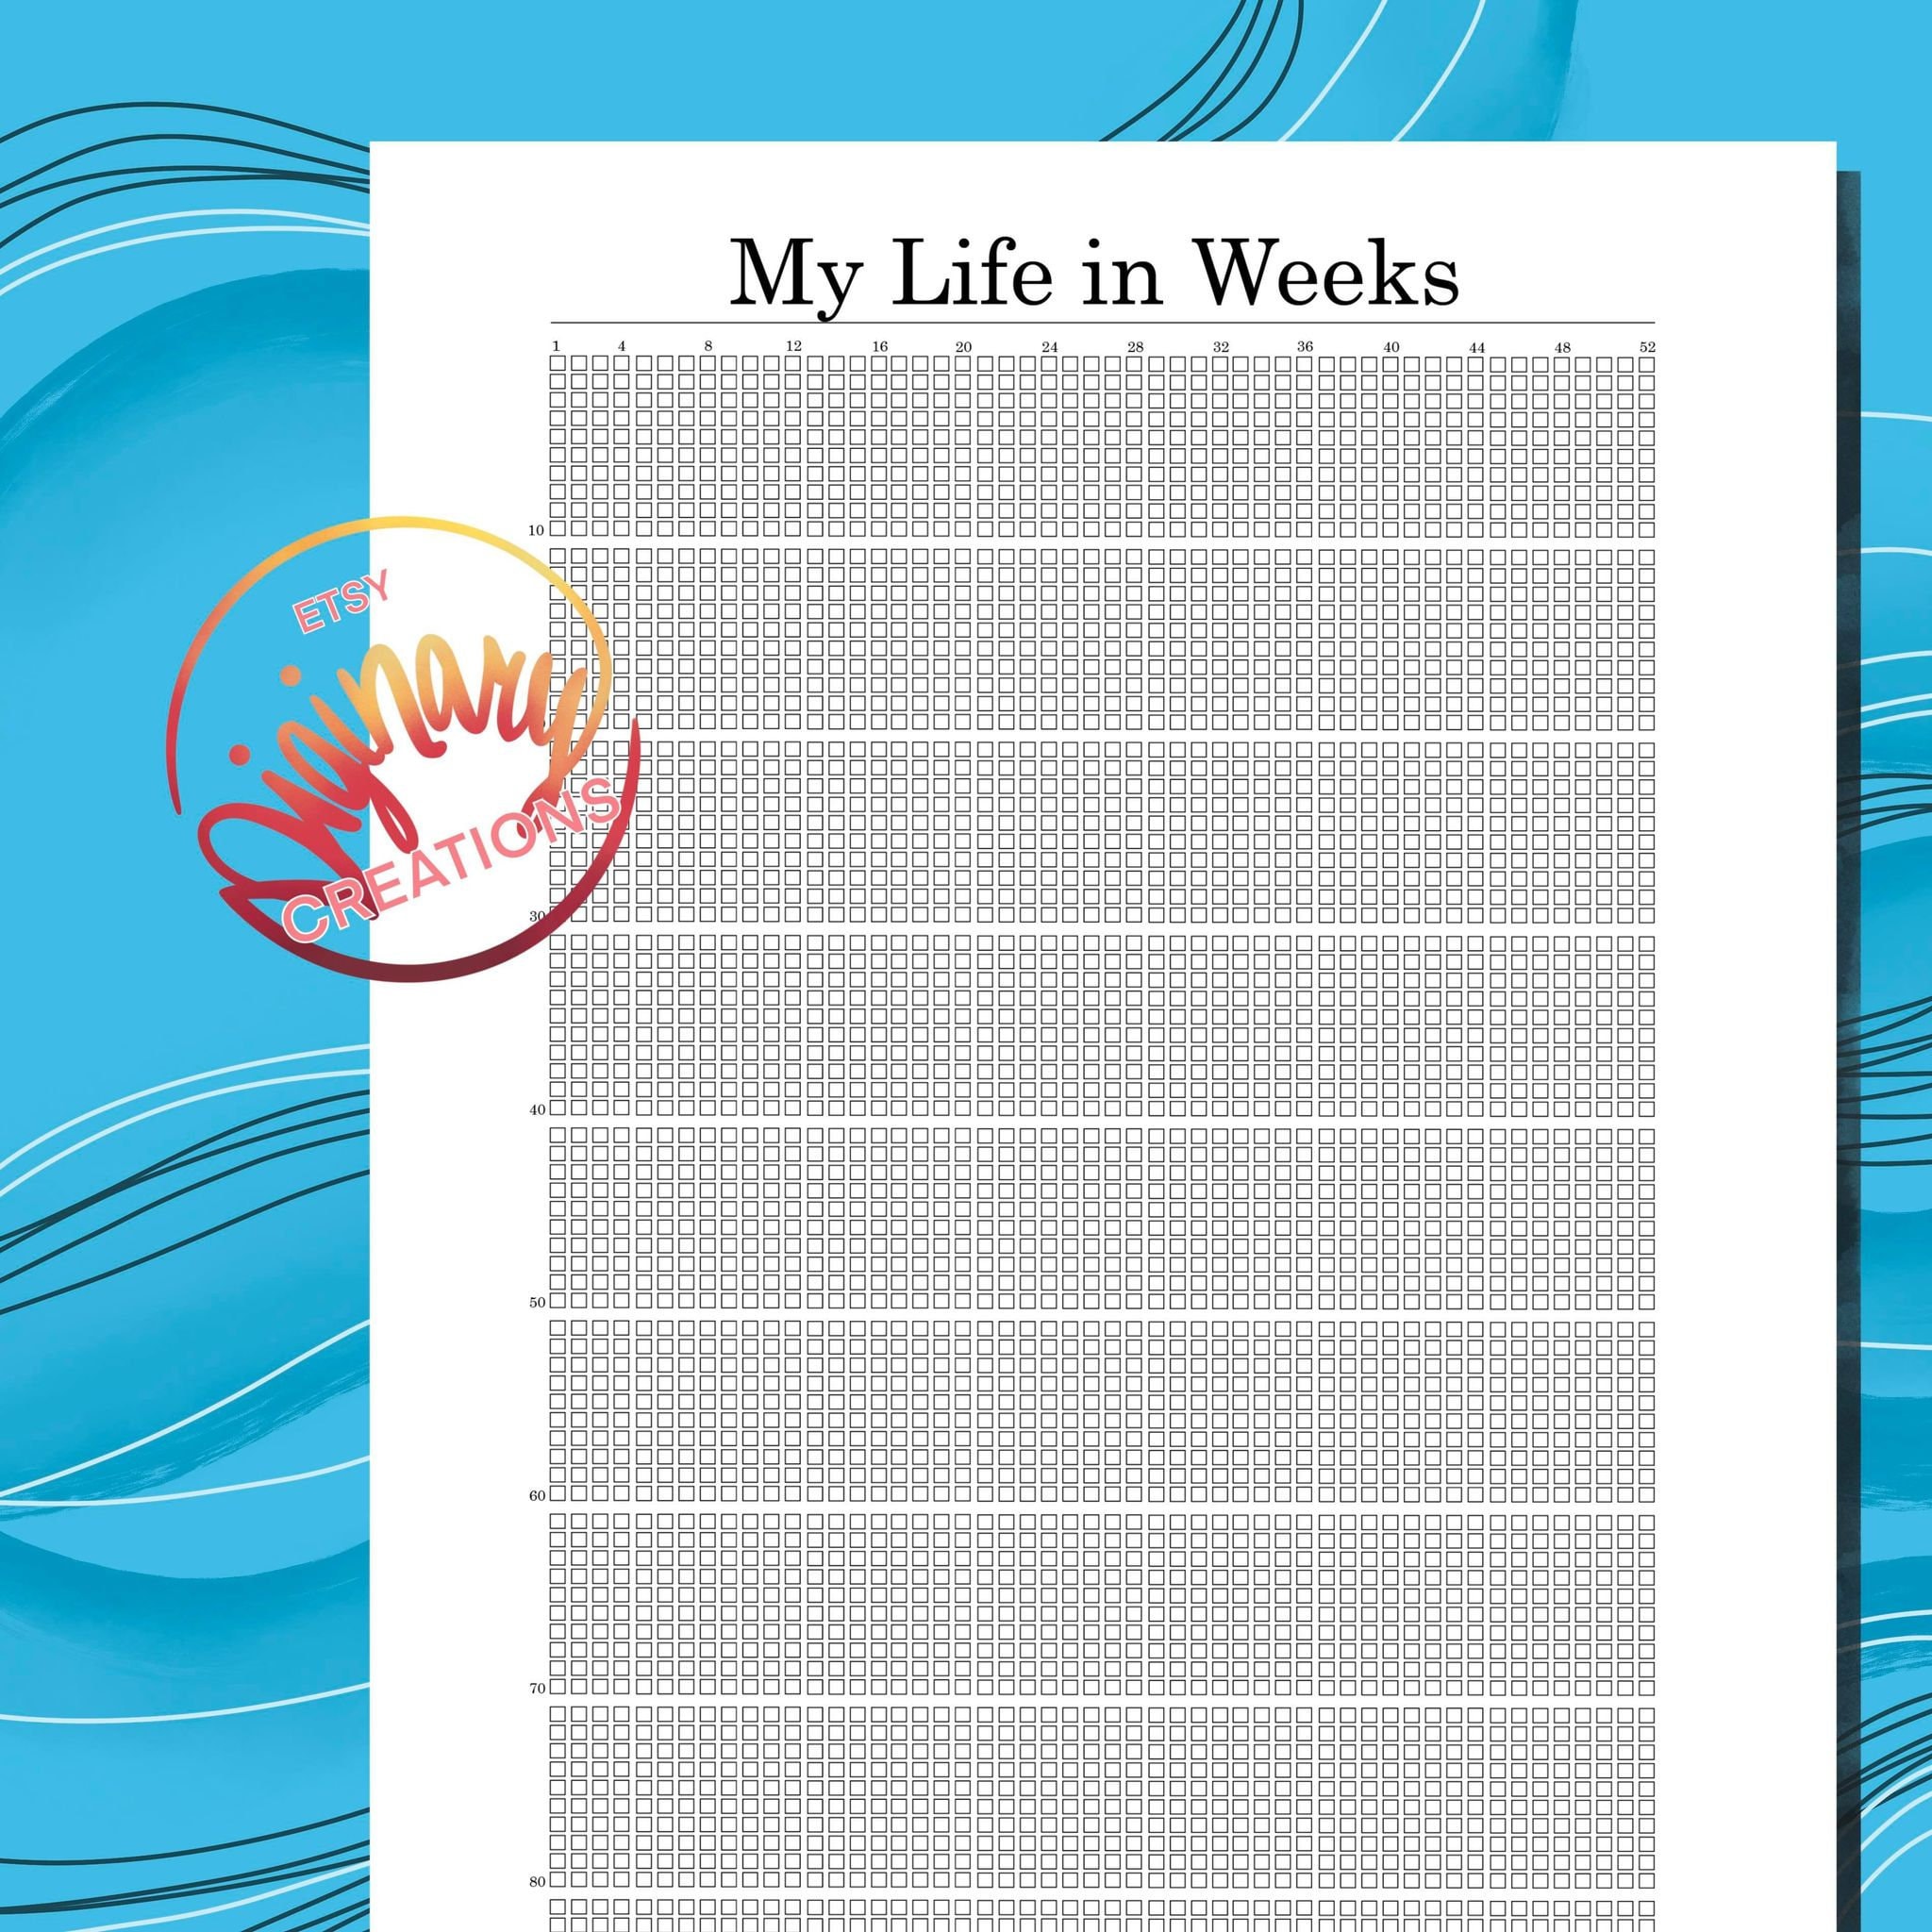 My Life in Weeks Life Calendar for an Inspiring Display or Etsy